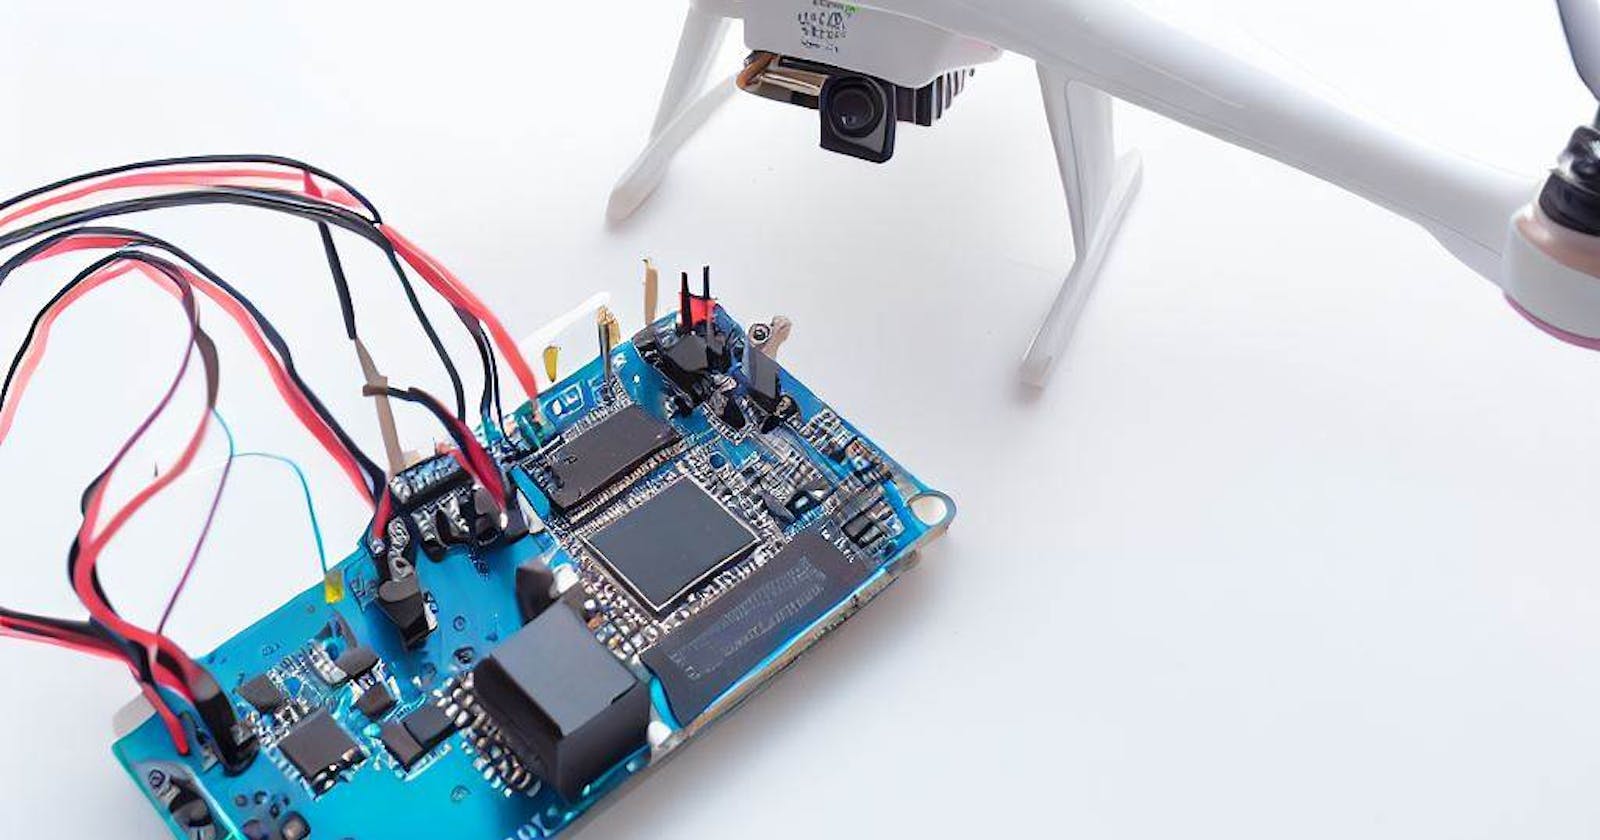 Mapping the Skies: Drone Flying Route Planner by using the GY-NEO6MV2 module and an Arduino board